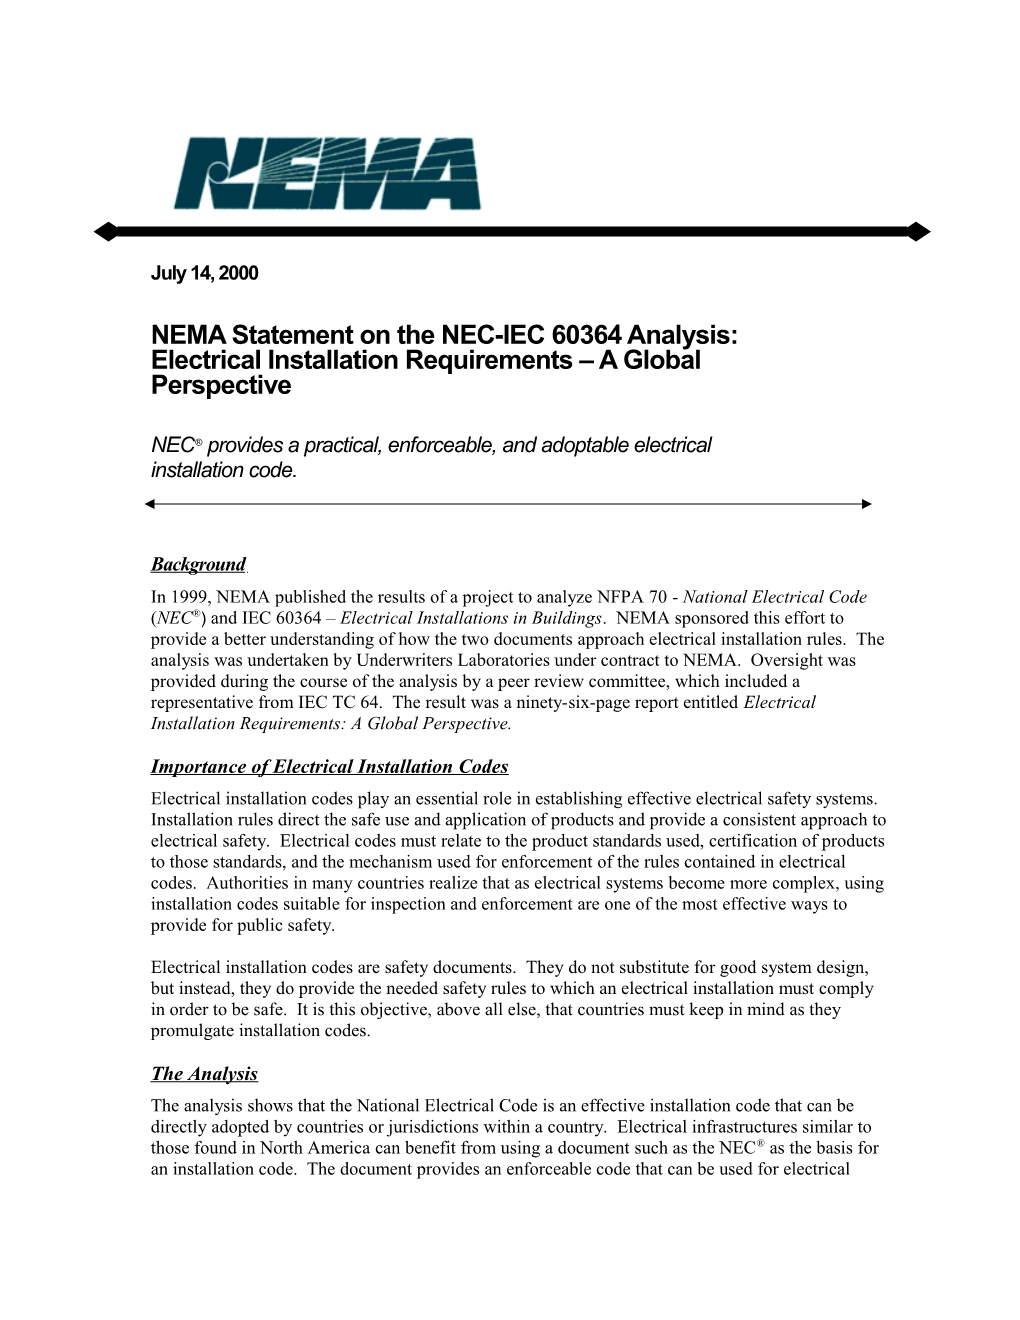 NEMA Statement on the NEC-IEC 60364 Analysis: Electrical Installation Requirements a Global